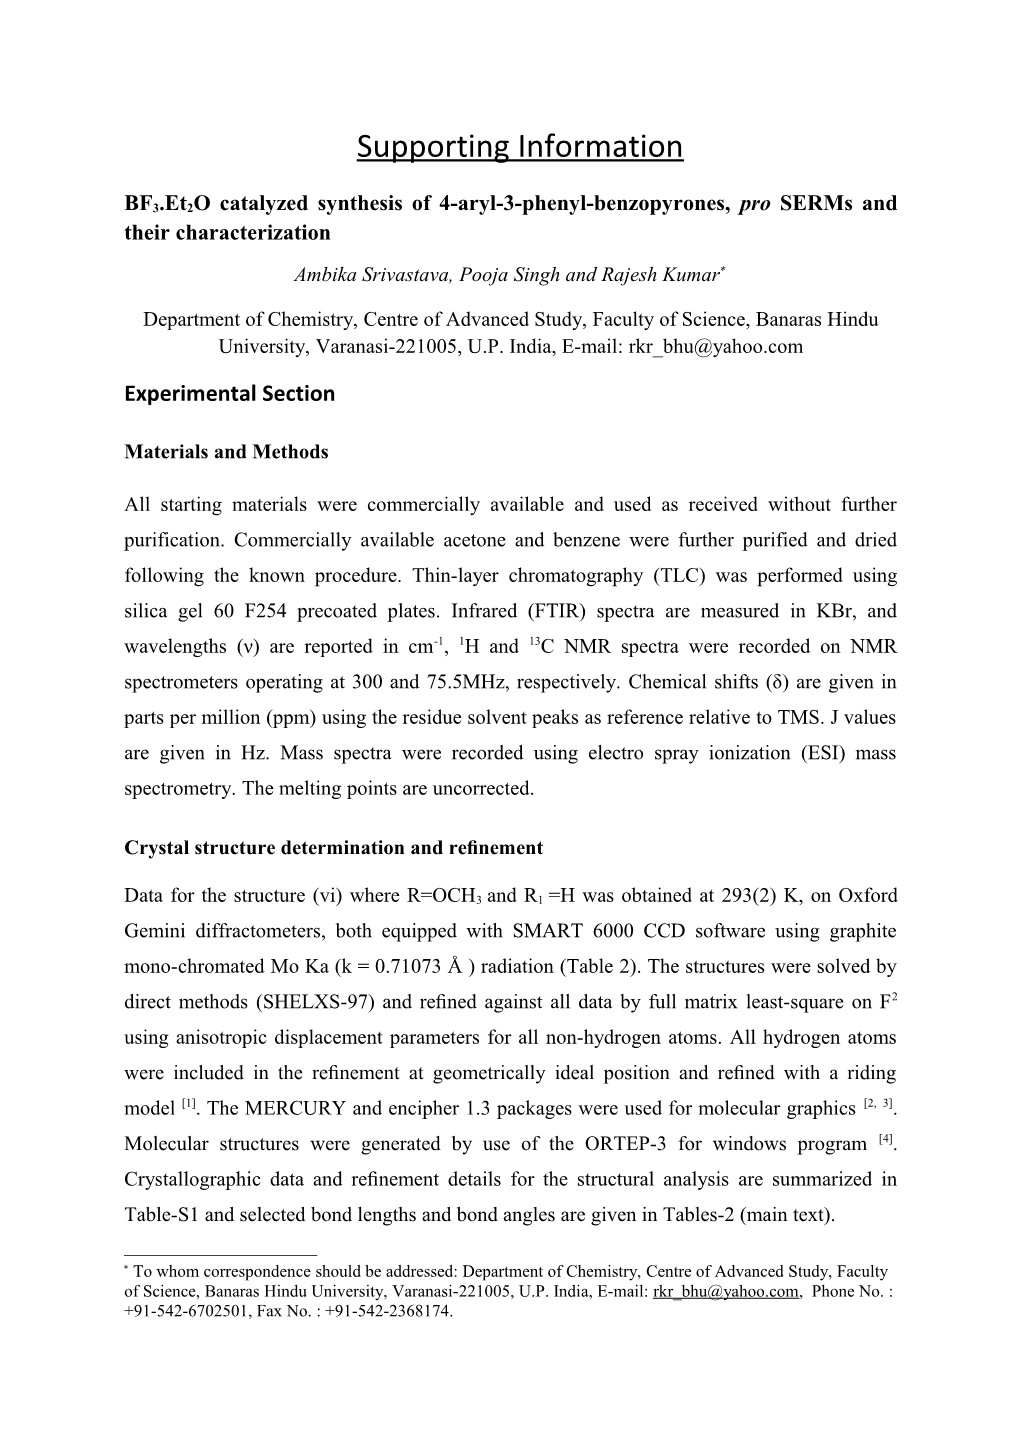 BF3.Et2o Catalyzed Synthesis of 4-Aryl-3-Phenyl-Benzopyrones, Pro Serms and Their